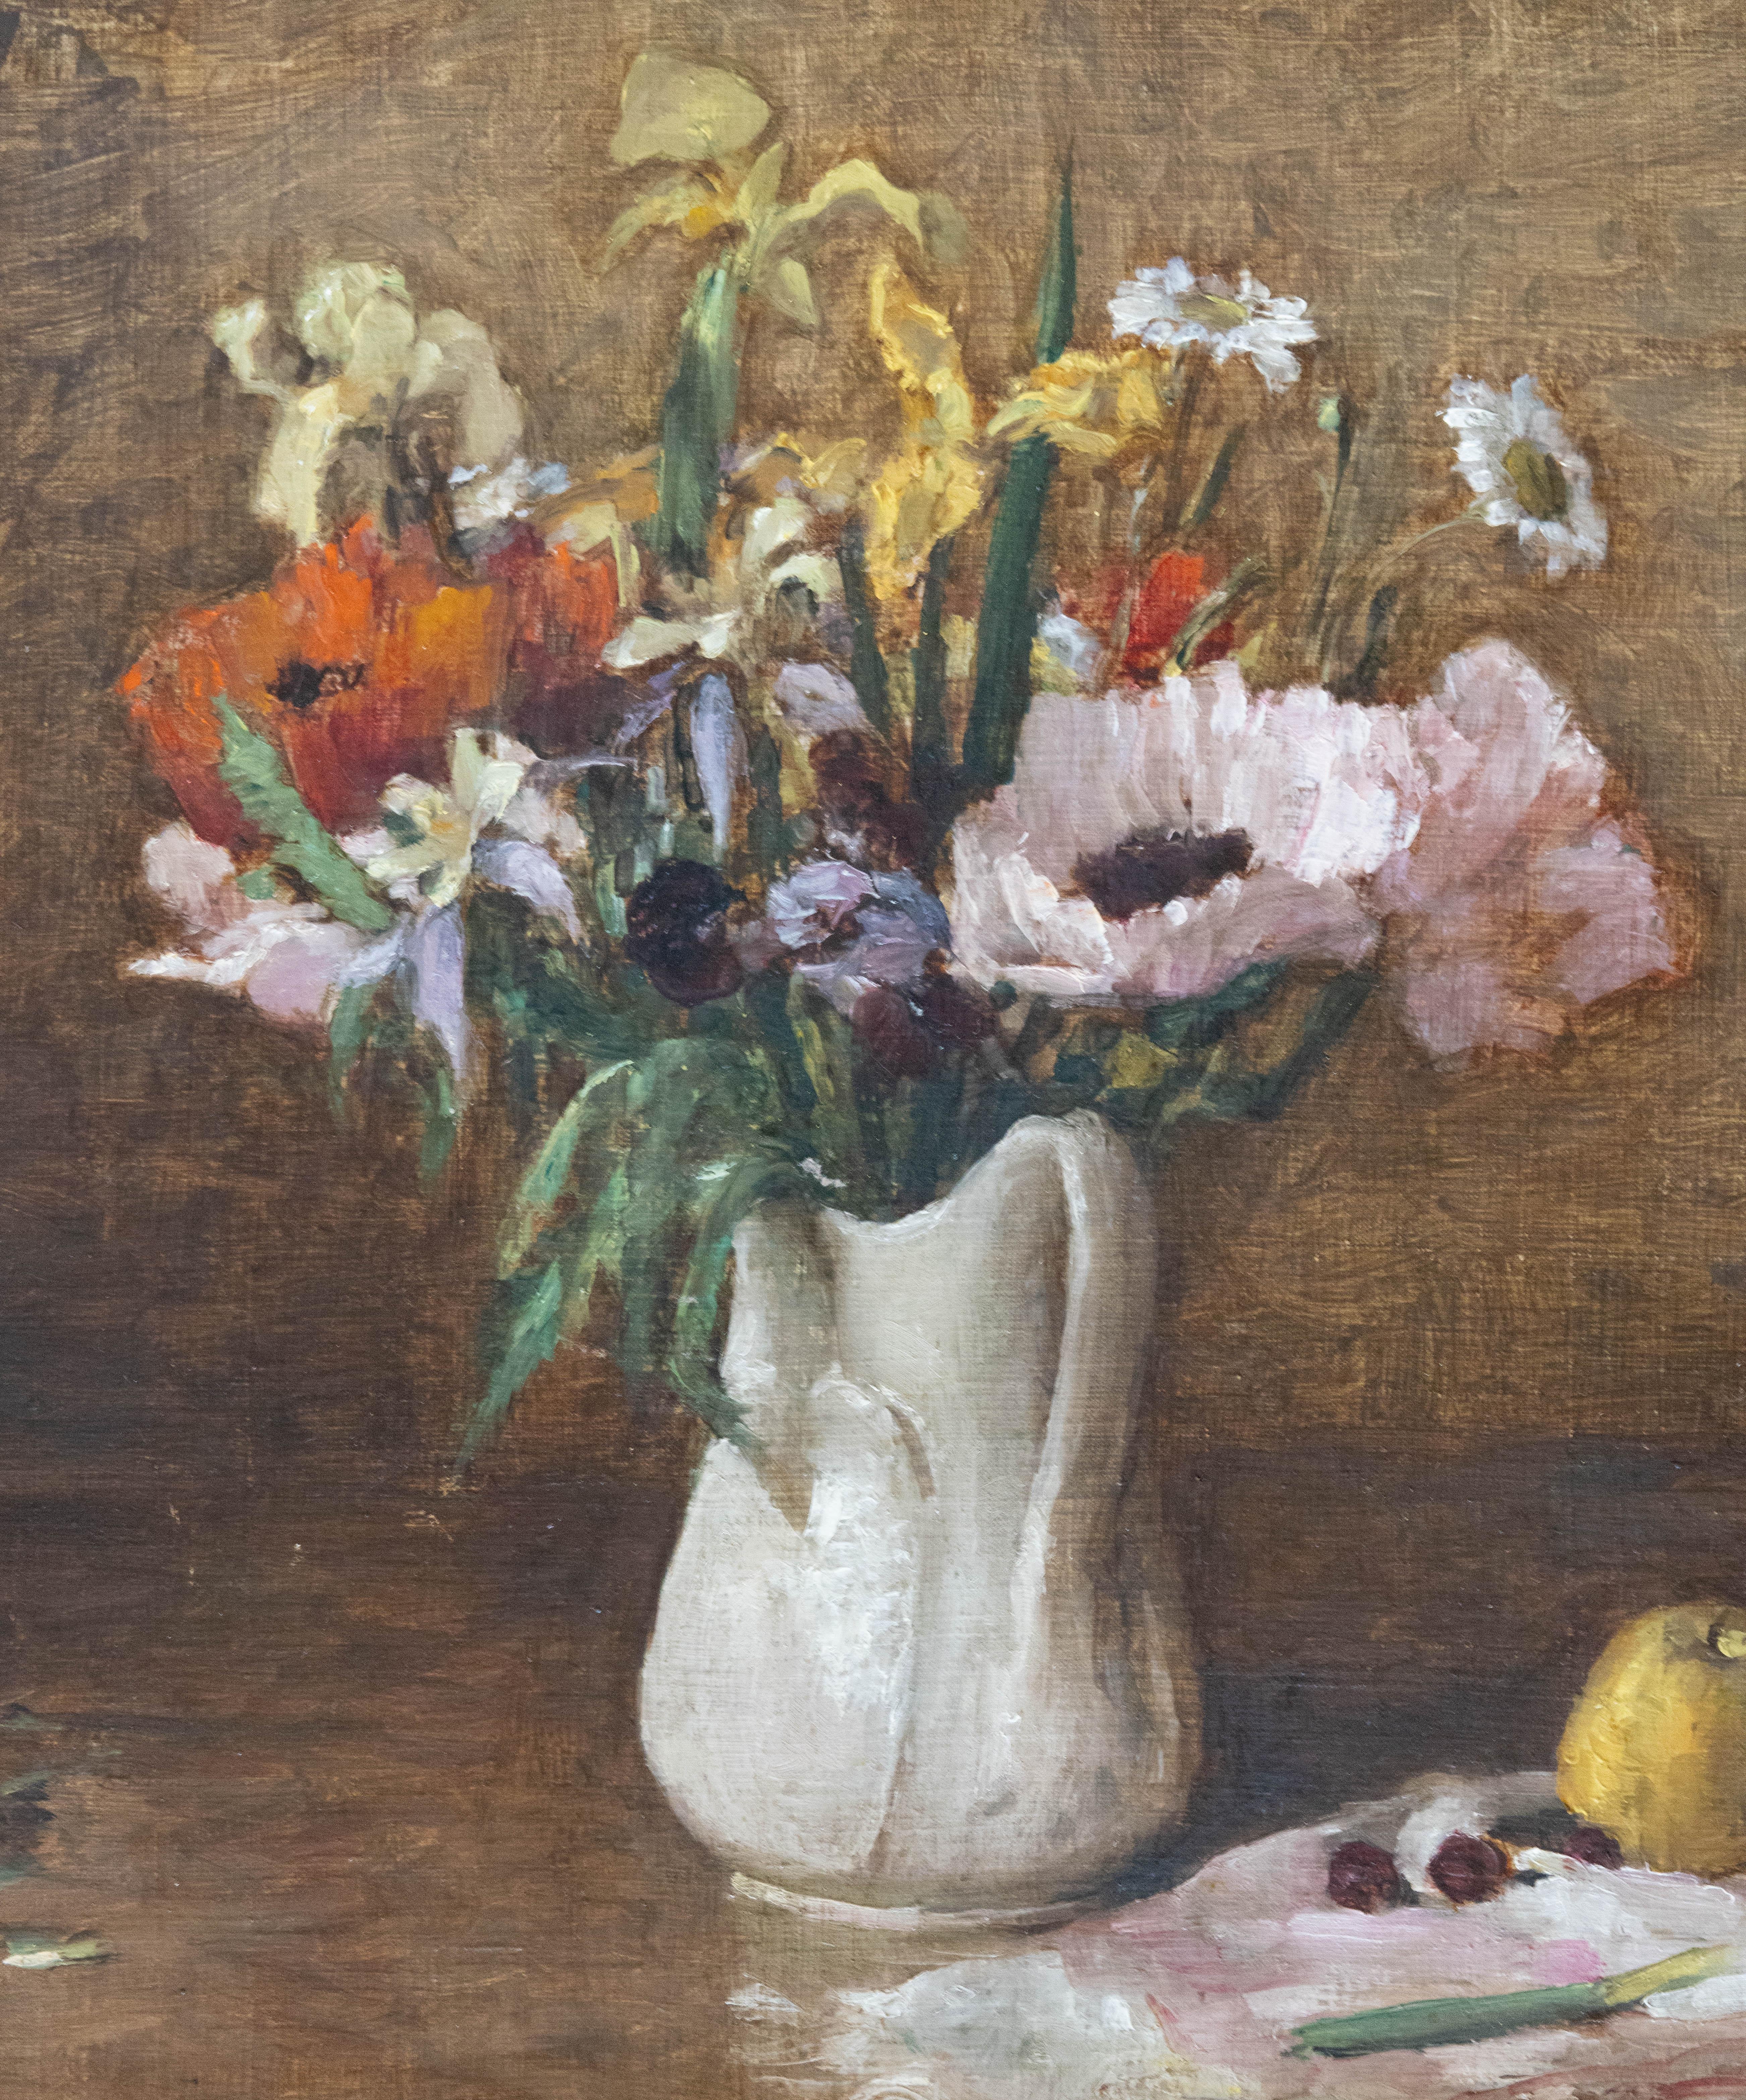 Wonderfully romantic still life with poppies, daffodils, and daisies set within an ironstone pitcher. Pears to the side. Signed illegibly upper left.